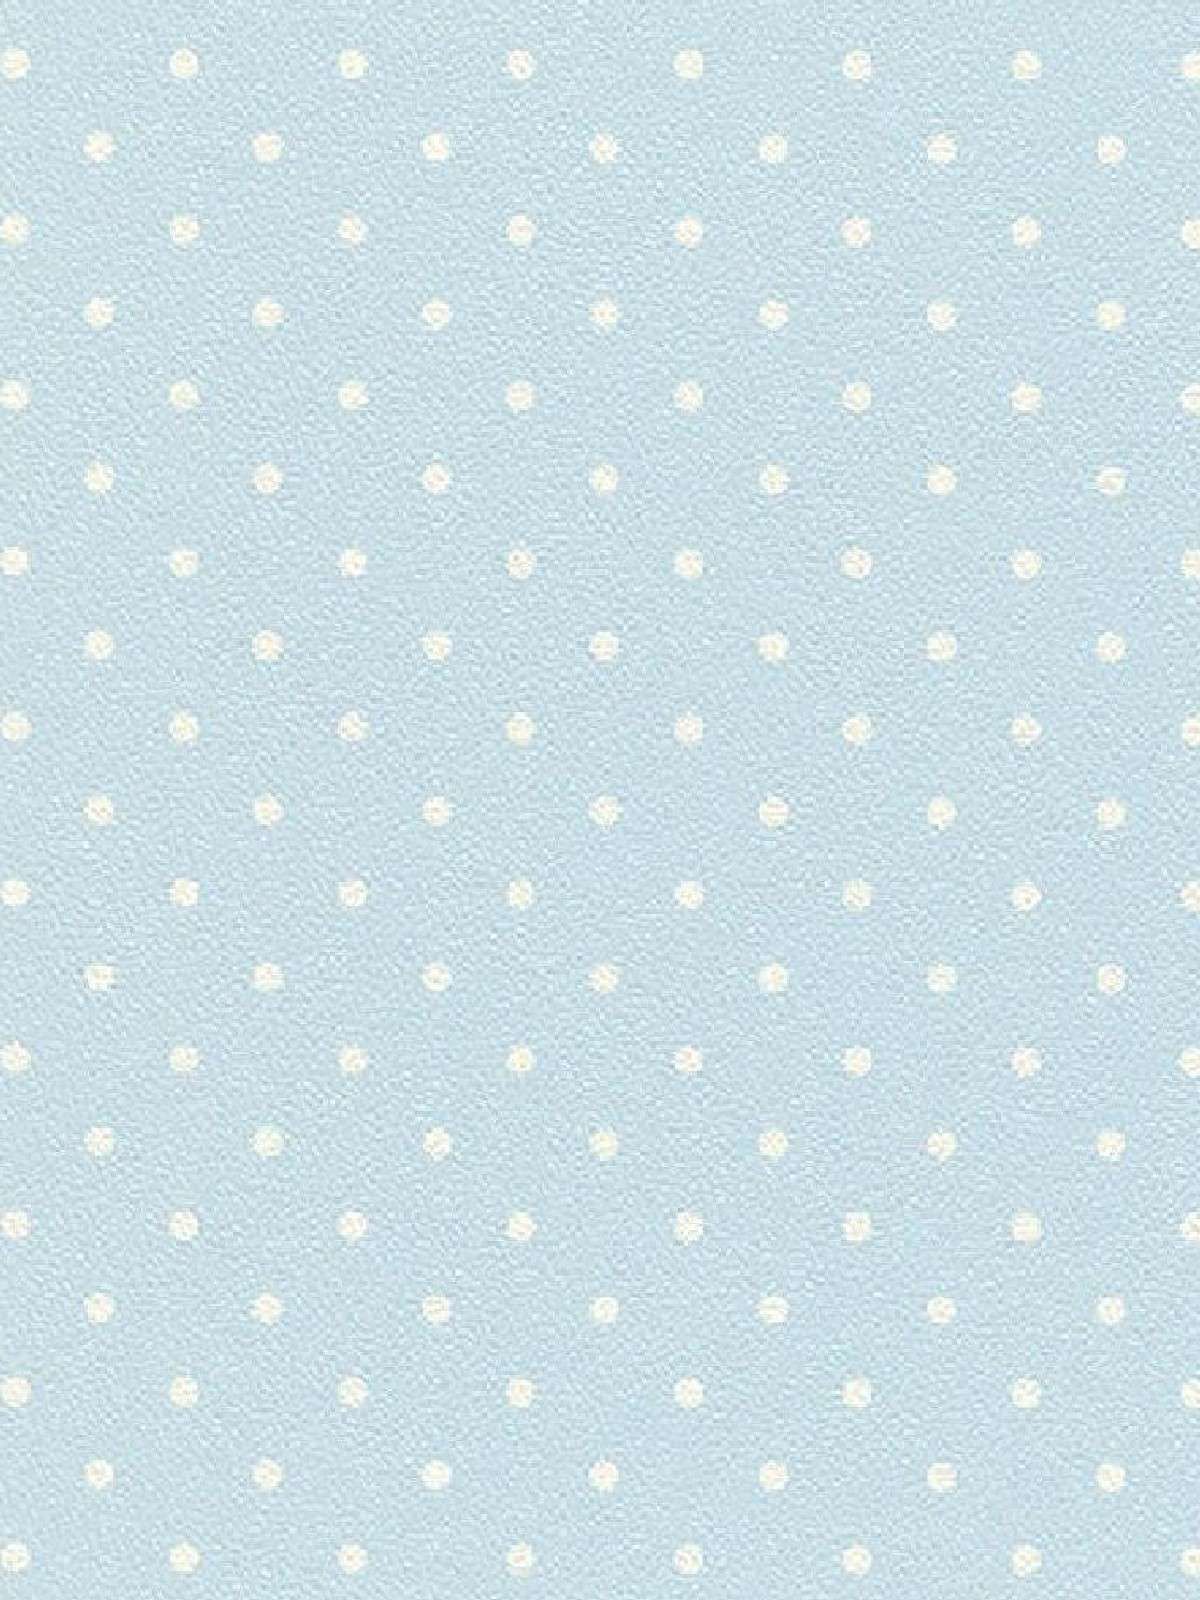 Rasch Pastel Blue With White Polka Dots Wallpaper